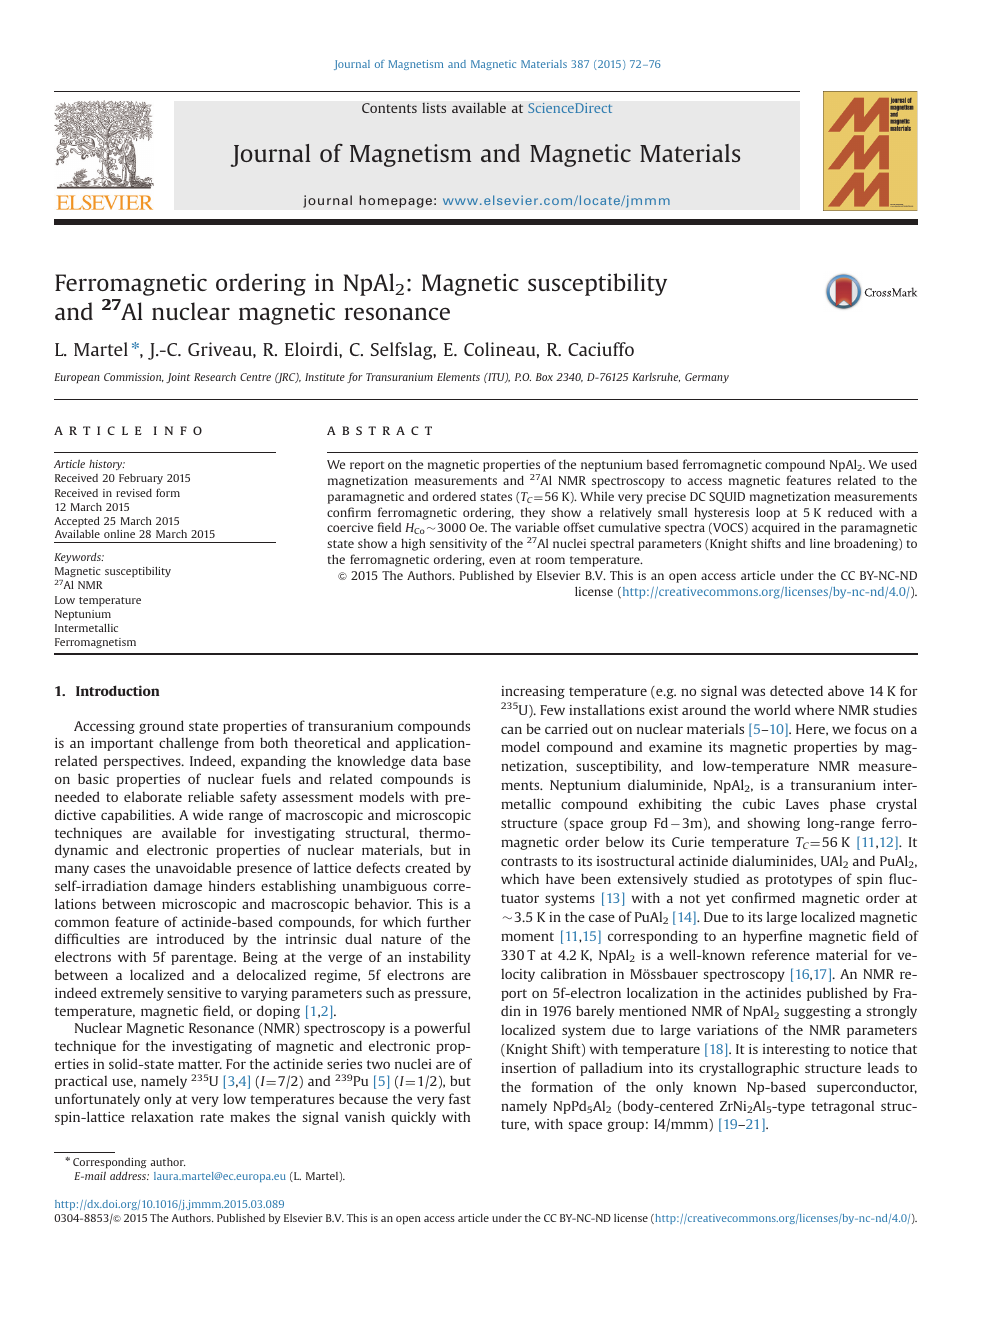 Ferromagnetic Ordering In Npal2 Magnetic Susceptibility And 27al Nuclear Magnetic Resonance Topic Of Research Paper In Materials Engineering Download Scholarly Article Pdf And Read For Free On Cyberleninka Open Science Hub